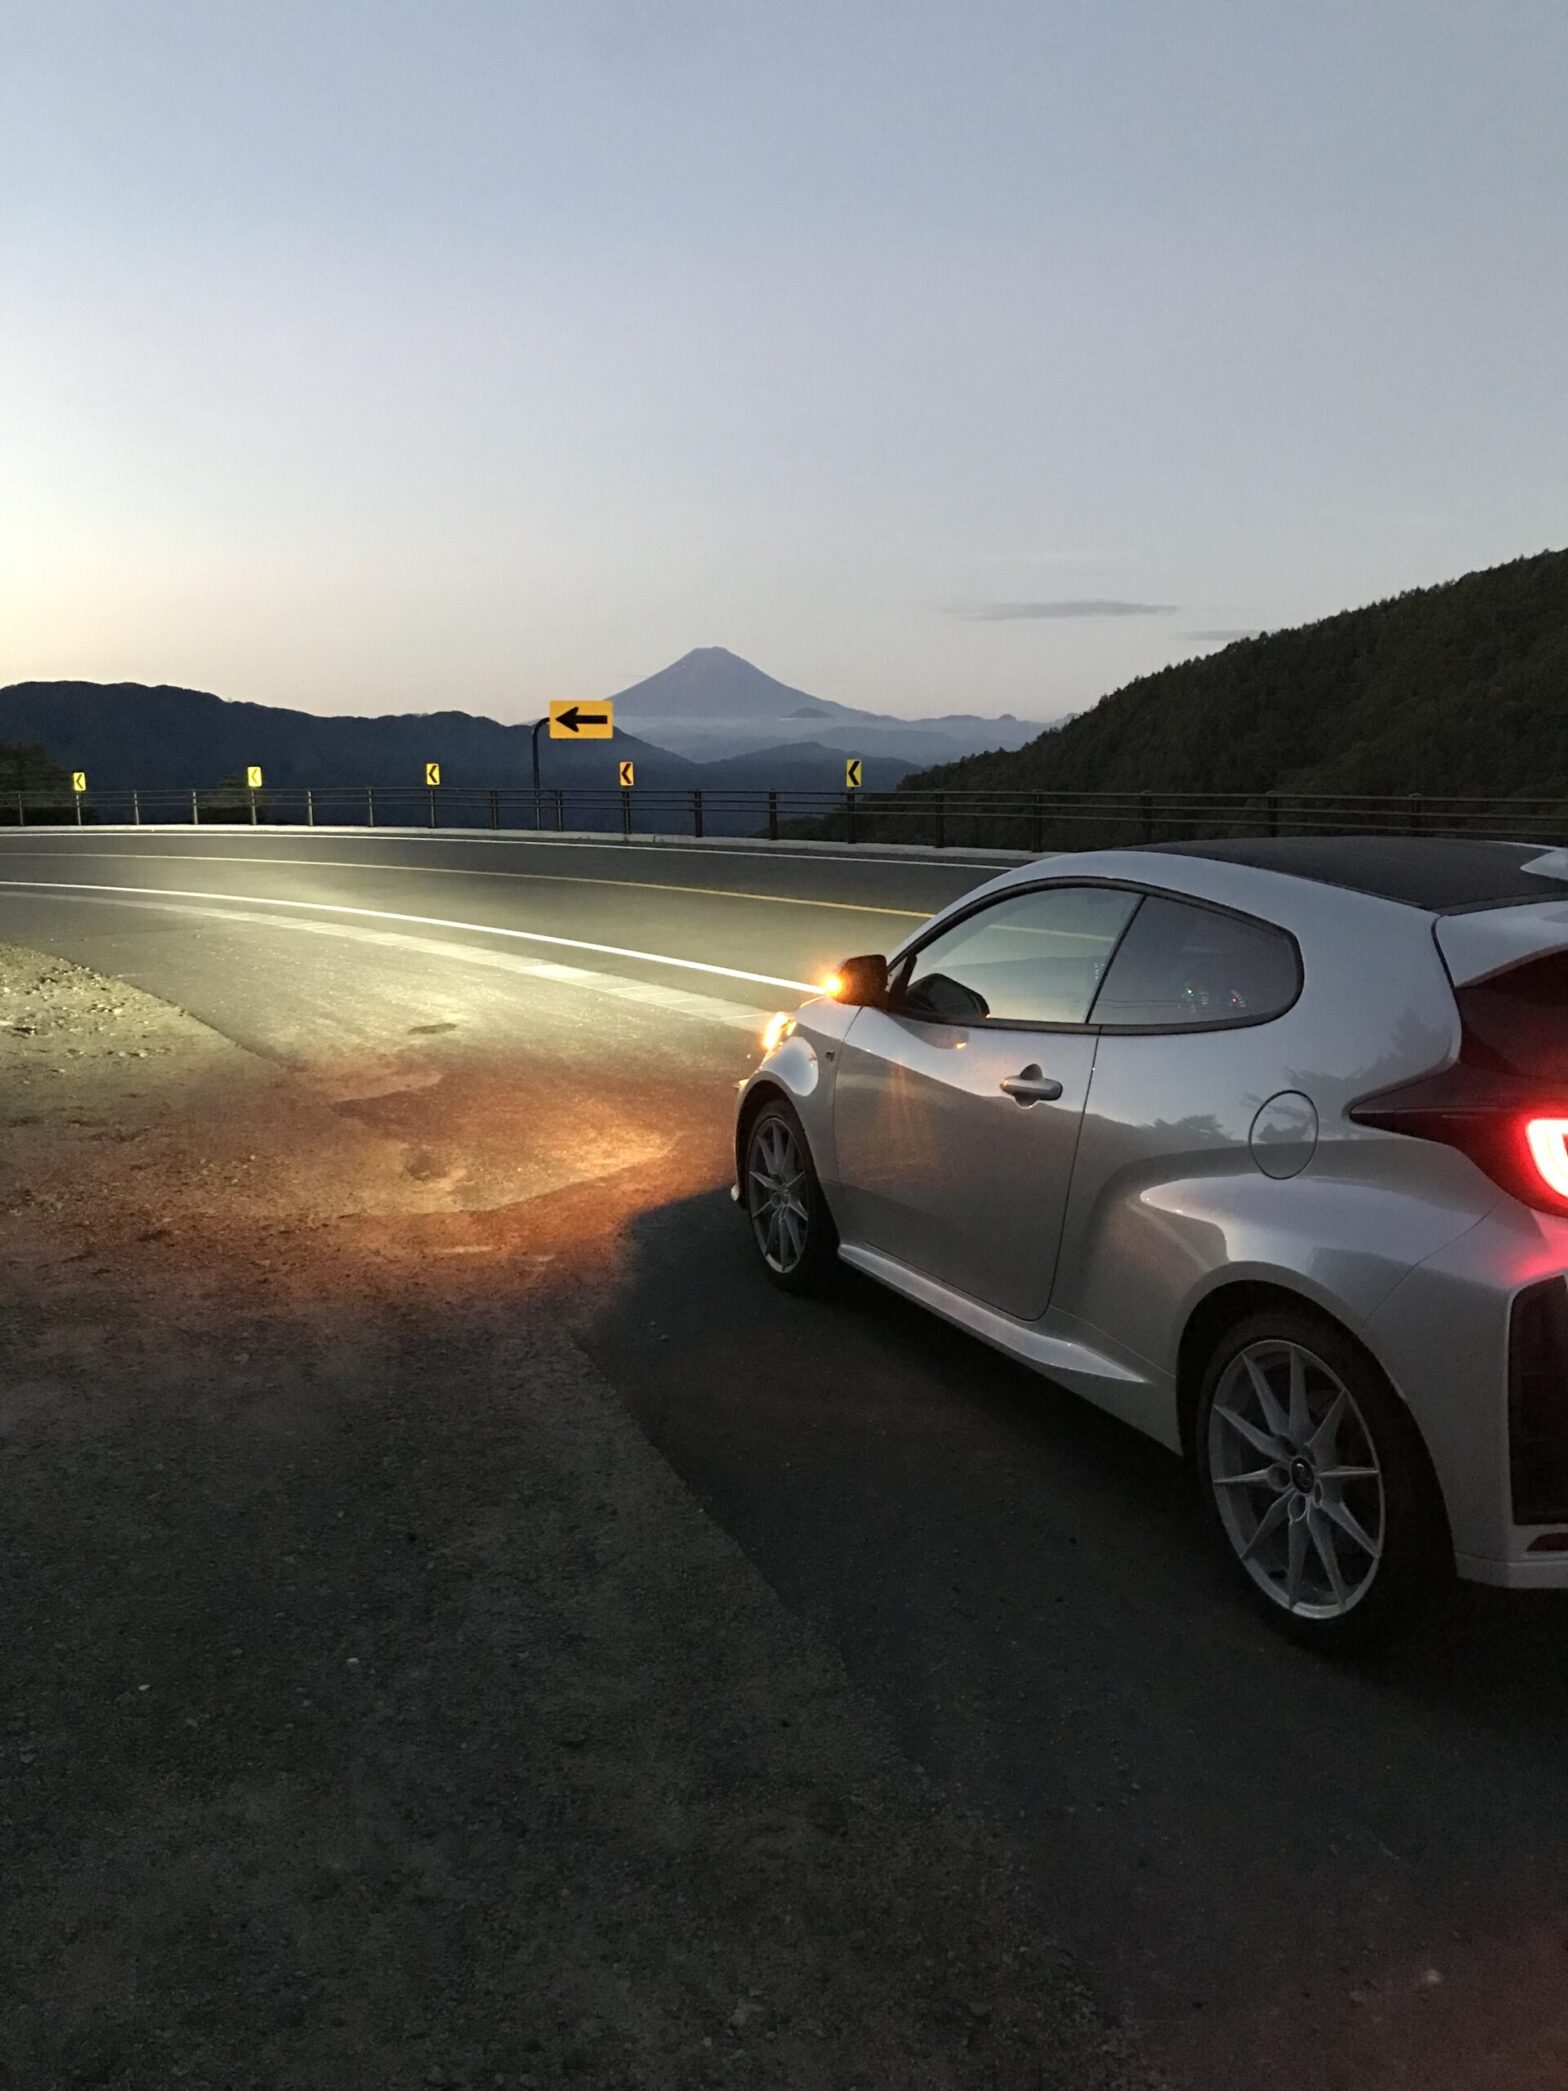 GR Yaris with Mount Fuji in the early morning as the backdrop